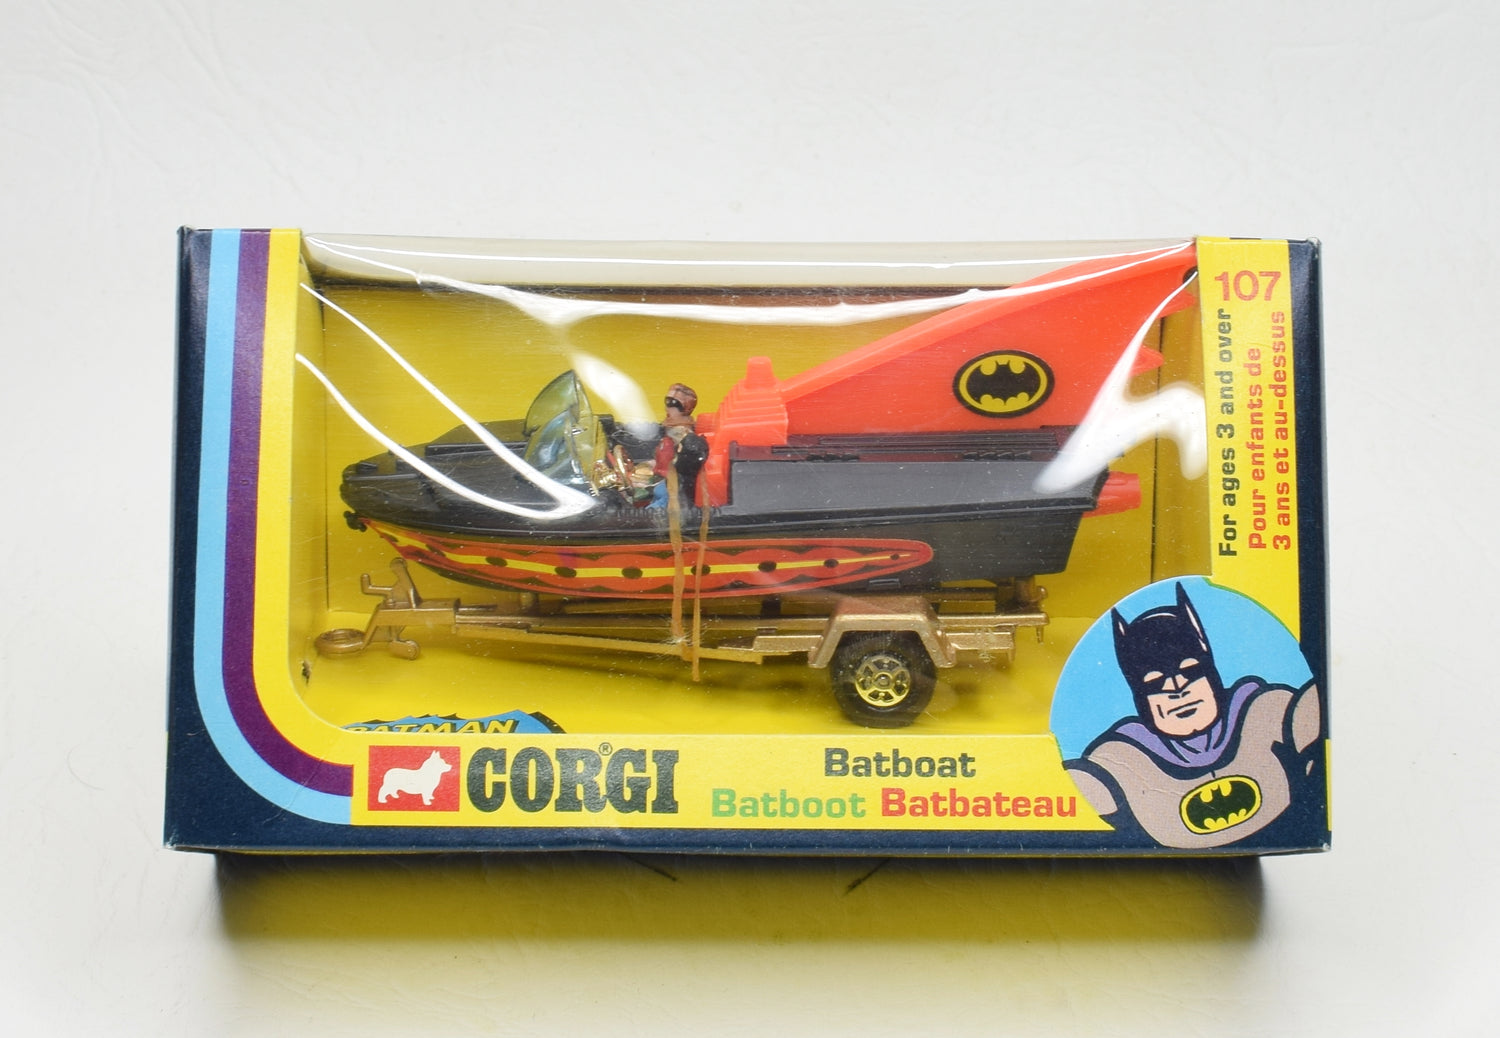 Corgi toys 107 Batboat 2nd issue Virtually Mint/Boxed (New 'The Lane' Collection)